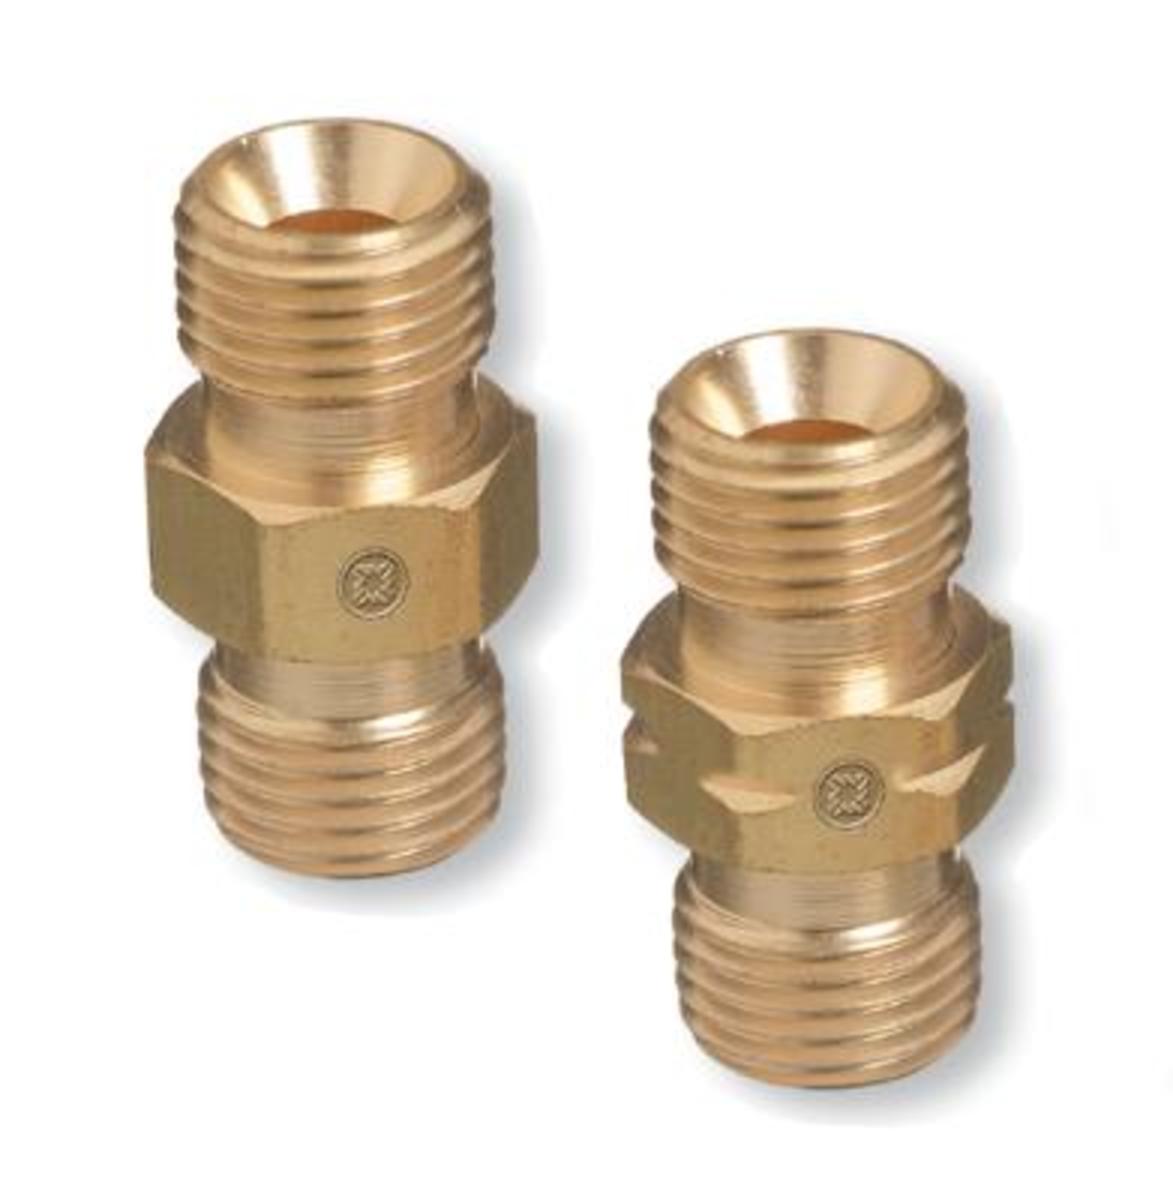 Super Finish Alloy 464 Brass Hose Pneumatic Pipe Fittings For Plumbing,  Oil, Gas And Steam, Size: custom at Rs 39/piece in Coimbatore